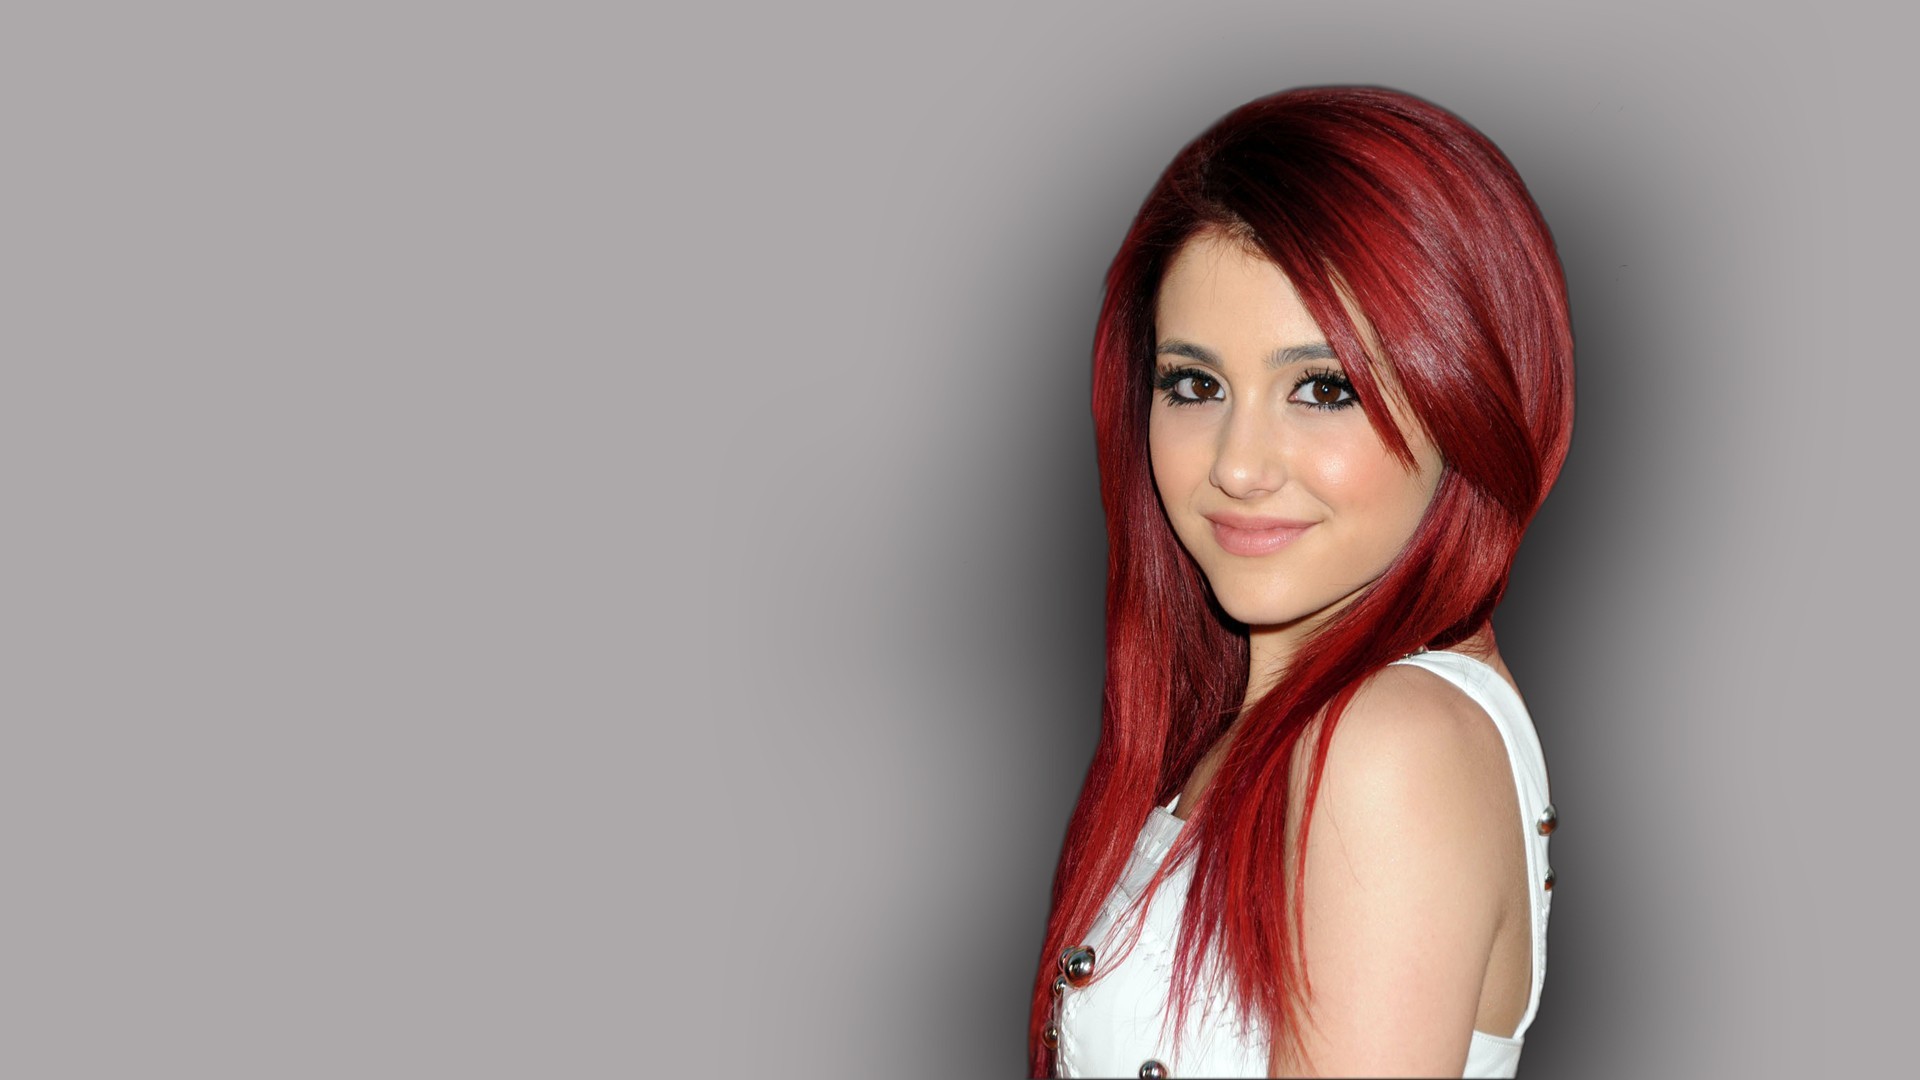 Redhead Girl Ariana Grande Wallpapers And Images Wallpapers Pictures Photos